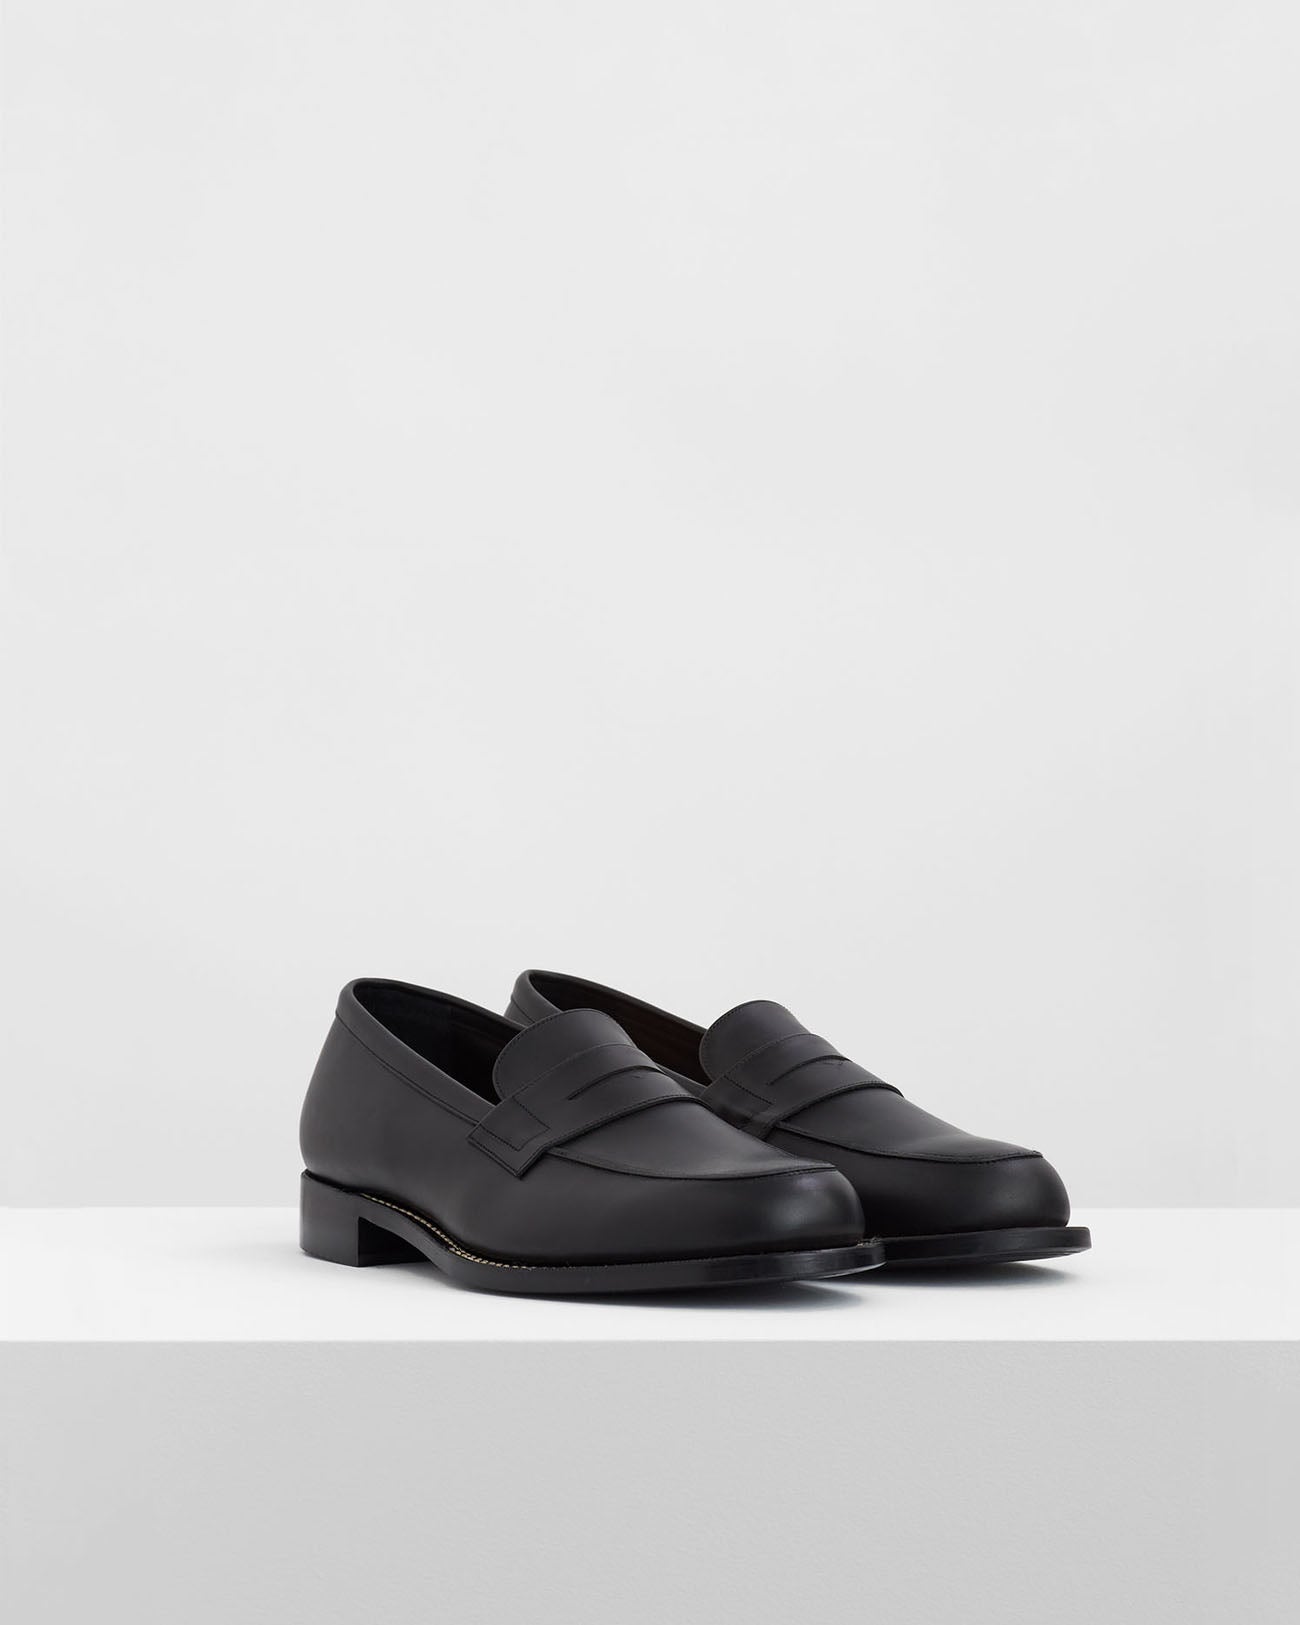 Coin Loafers - black